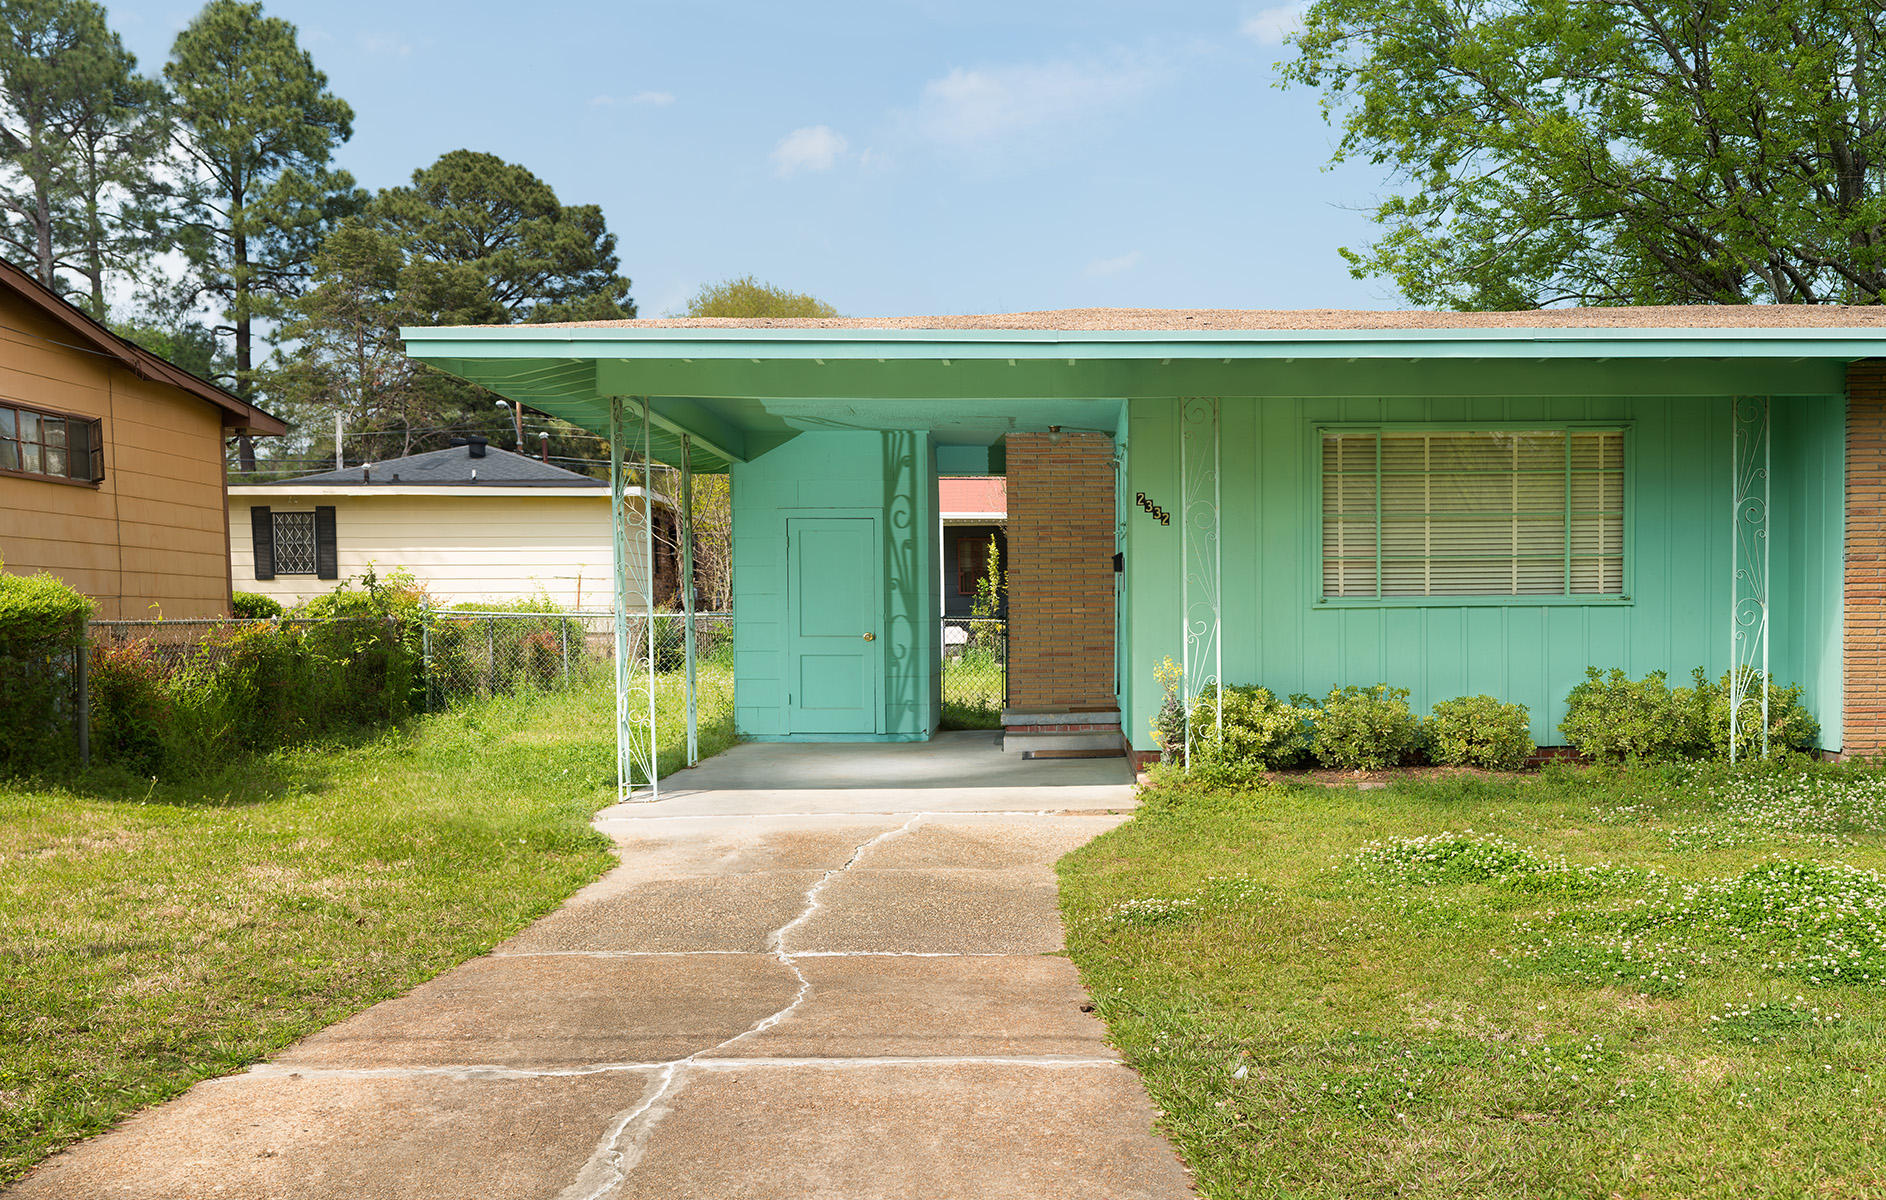 <div class="storycaption">
	<div class="galleryIntroTextArea holder">
		<div class="galleryIntroTextContent">
			<div class="galleryIntroTextContentInside">
				<div class="frishhead">
					MEDGAR EVERS' HOUSE 
				</div>
				<div class="frishsubhead">
					JACKSON, MISSISSIPPI 
				</div>
				<div class="frishtext">
					Shortly after midnight on June 12, 1963, Medgar Evers, the first Mississippi state field secretary for the National Association for the Advancement of Colored People pulled into the driveway of his humble home in Jackson. He had been at an integration meeting, watching President John F. Kennedy's speech on national television in support of civil rights. Emerging from his car carrying T-shirts that stated, "Jim Crow Must Go," Evers was struck in the back with a bullet that ricocheted into his home. He staggered 30 feet before collapsing, dying at the local hospital 50 minutes later. Less than 24 hours earlier George Wallace had dramatically stood in a doorway at the University of Alabama's Foster Auditorium, physically blocking the entrance of the first 2 African American students enrolled at the university. During World War II, Evers volunteered for the U.S. Army and participated in the Normandy invasion. In 1952, he joined the National Association for the Advancement of Colored People (NAACP). As a field worker for the NAACP, Evers traveled through his home state encouraging poor African Americans to register to vote and recruiting them into the civil rights movement. He was instrumental in getting witnesses and evidence for the Emmett Till murder case, which brought national attention to the plight of African Americans in the South. 
				</div>
				<div class="frishdate">
					PHOTOGRAPHED: 2018 
				</div>
			</div>
		</div>
	</div>
</div> : IMAGES : Ghosts of Segregation